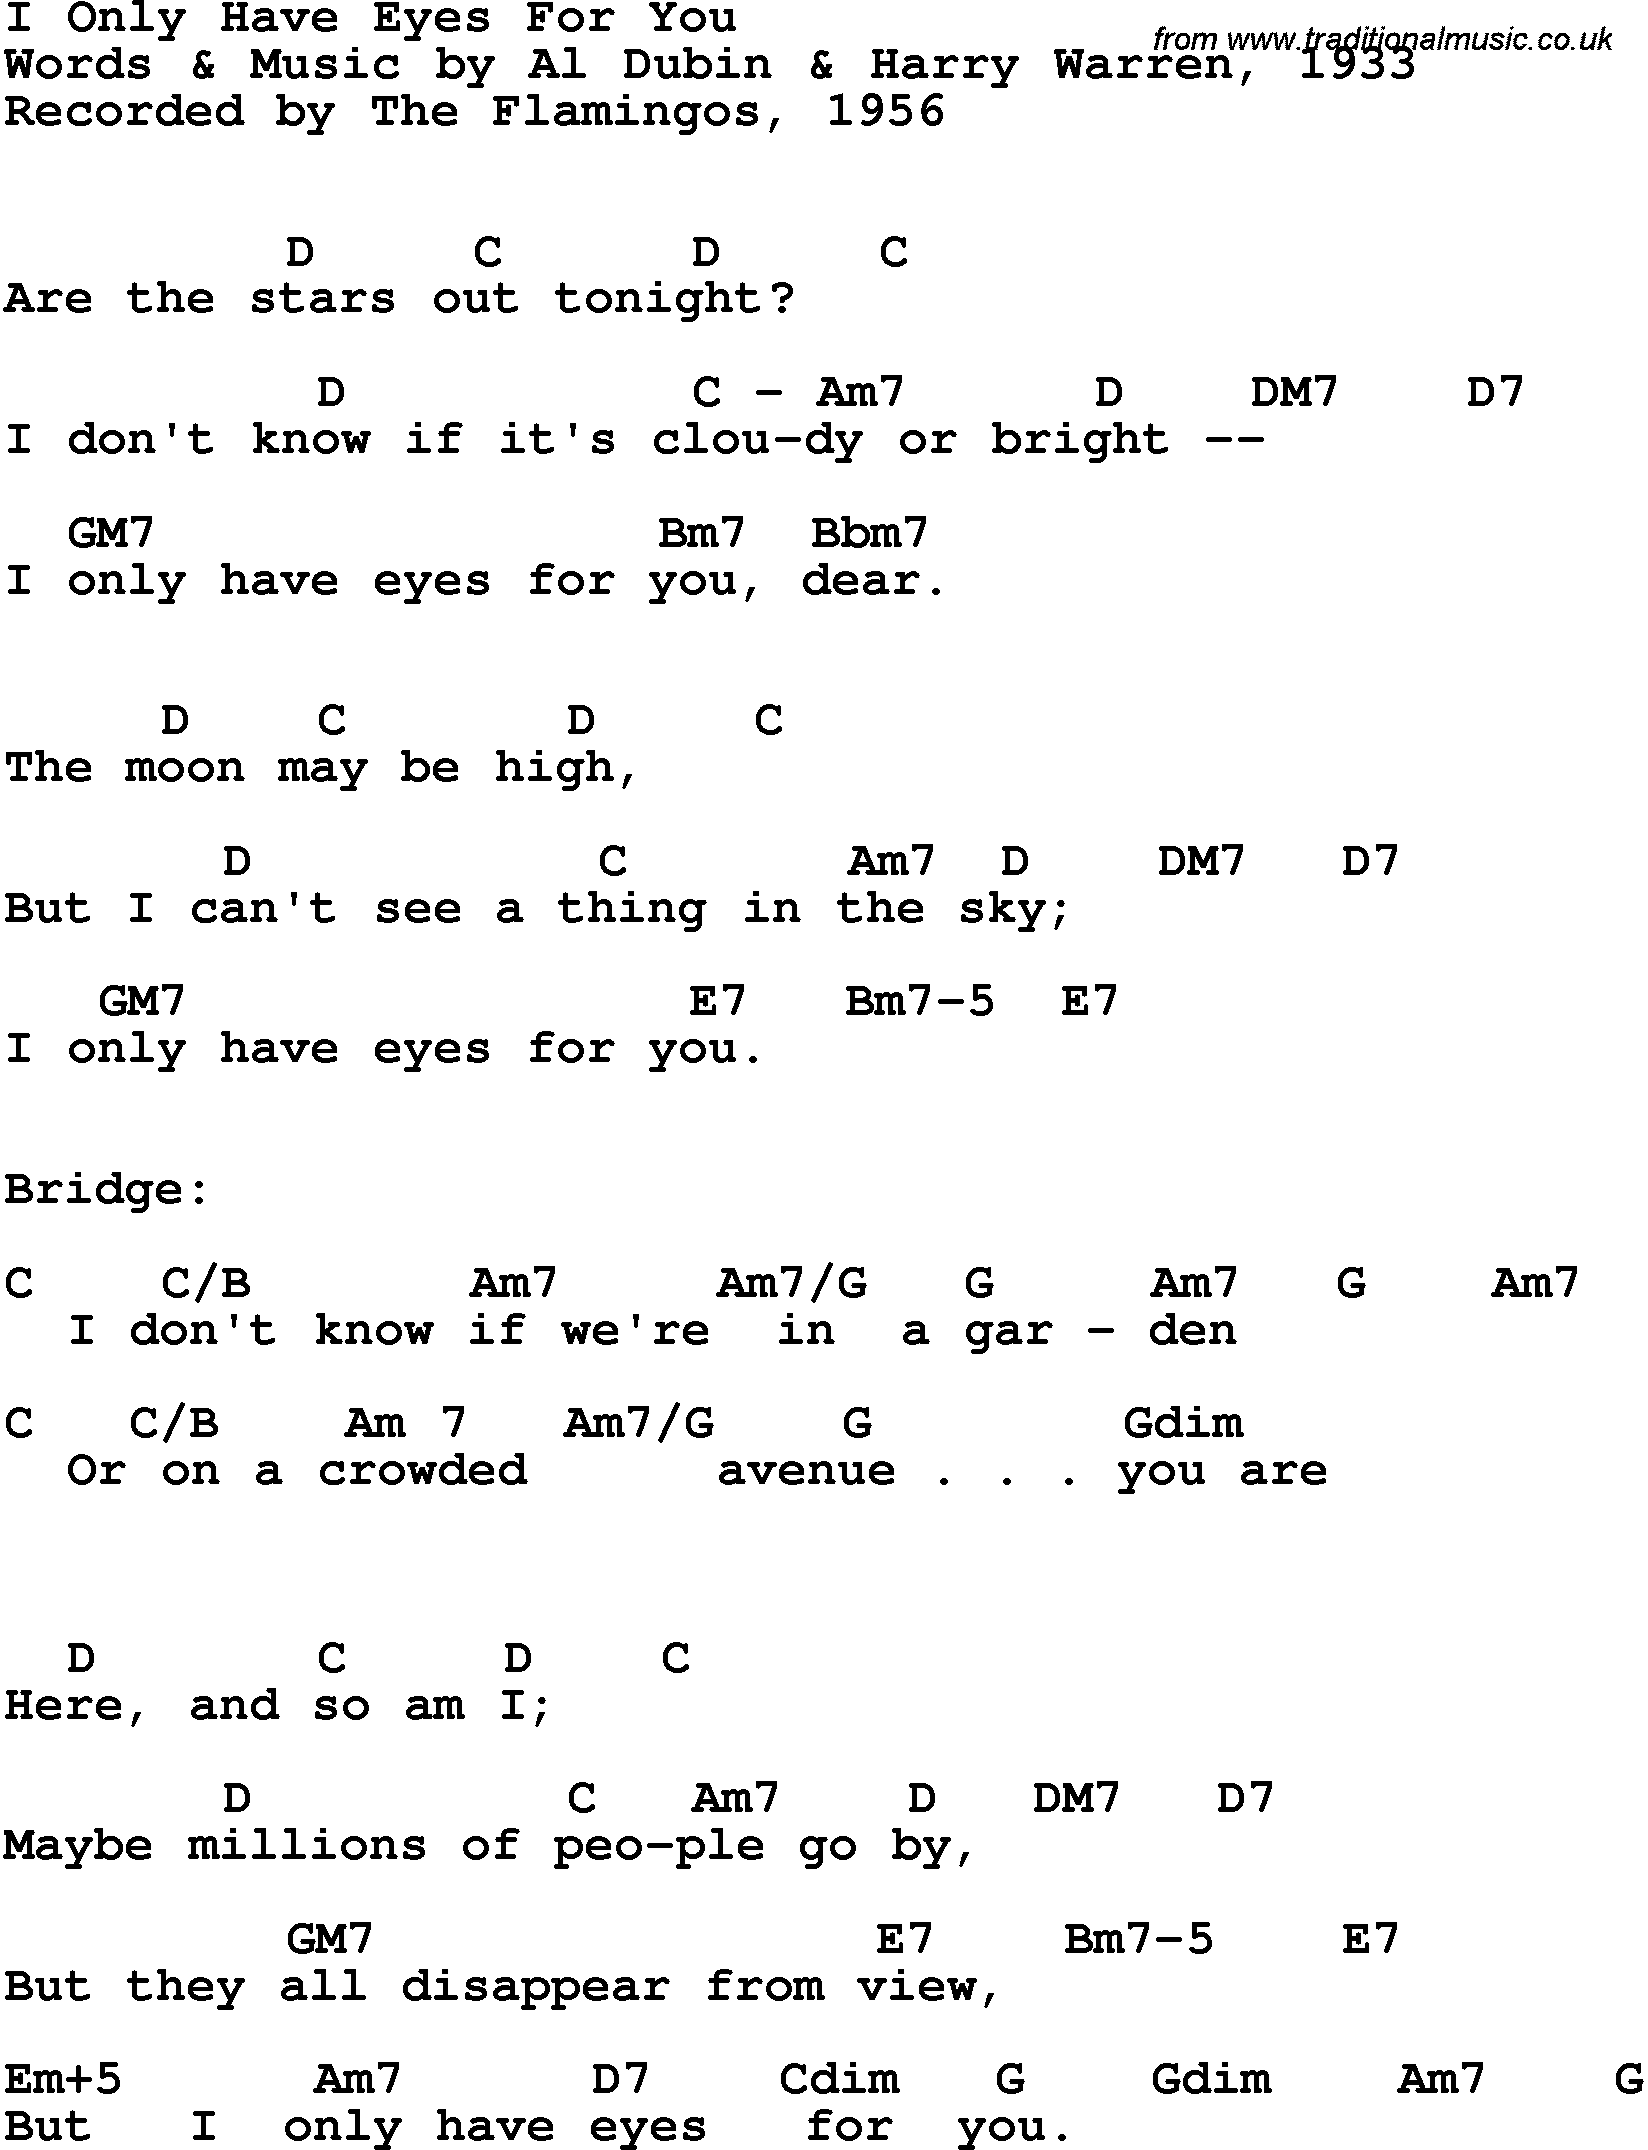 Song Lyrics with guitar chords for I Only Have Eyes For You - The Flamingos, 1959